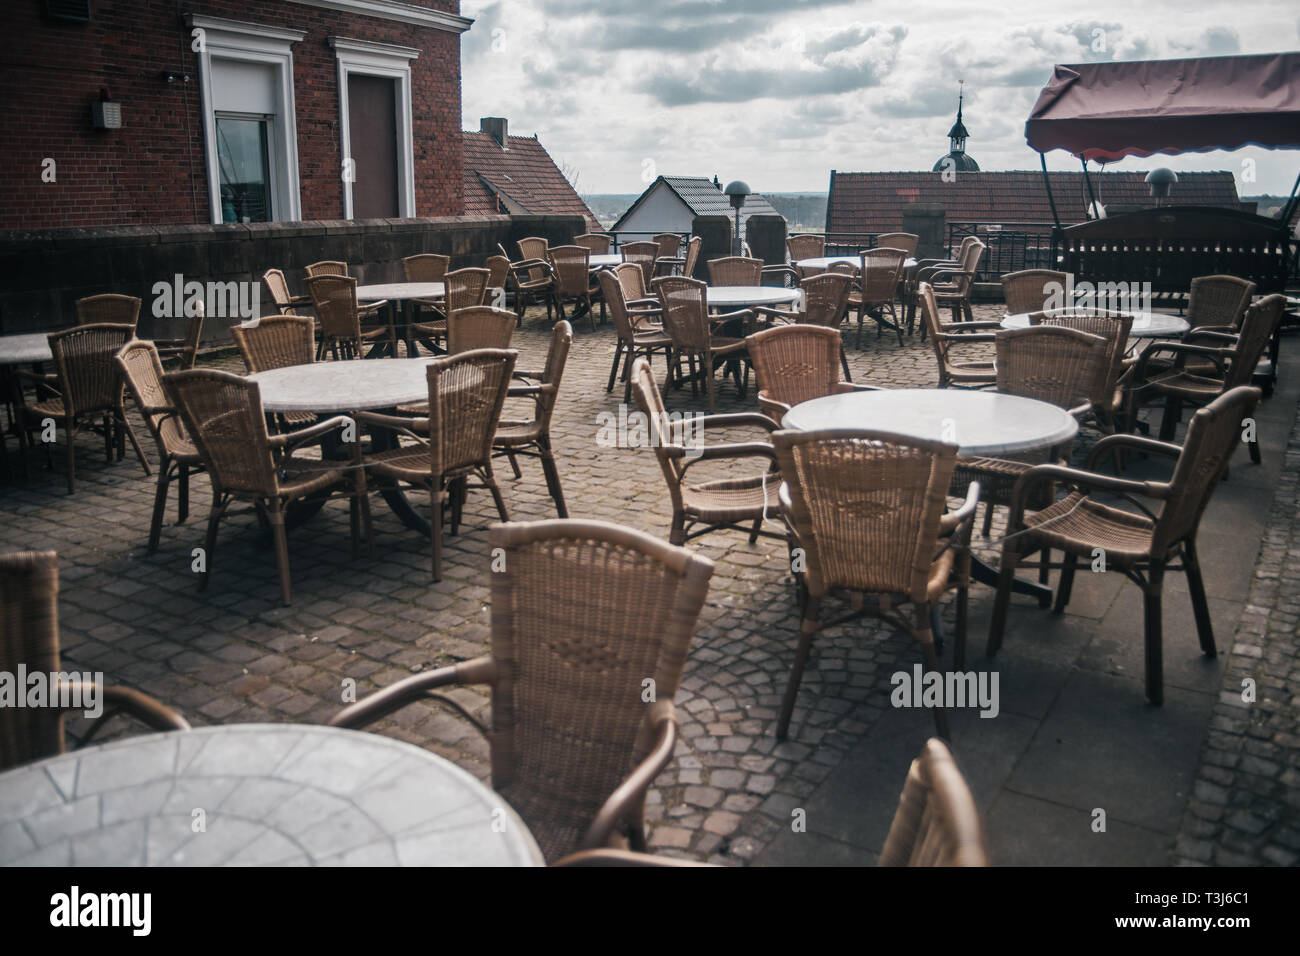 View of empty outdoor cafe in Bad Bentheim, Germany, with cozy decorations Stock Photo